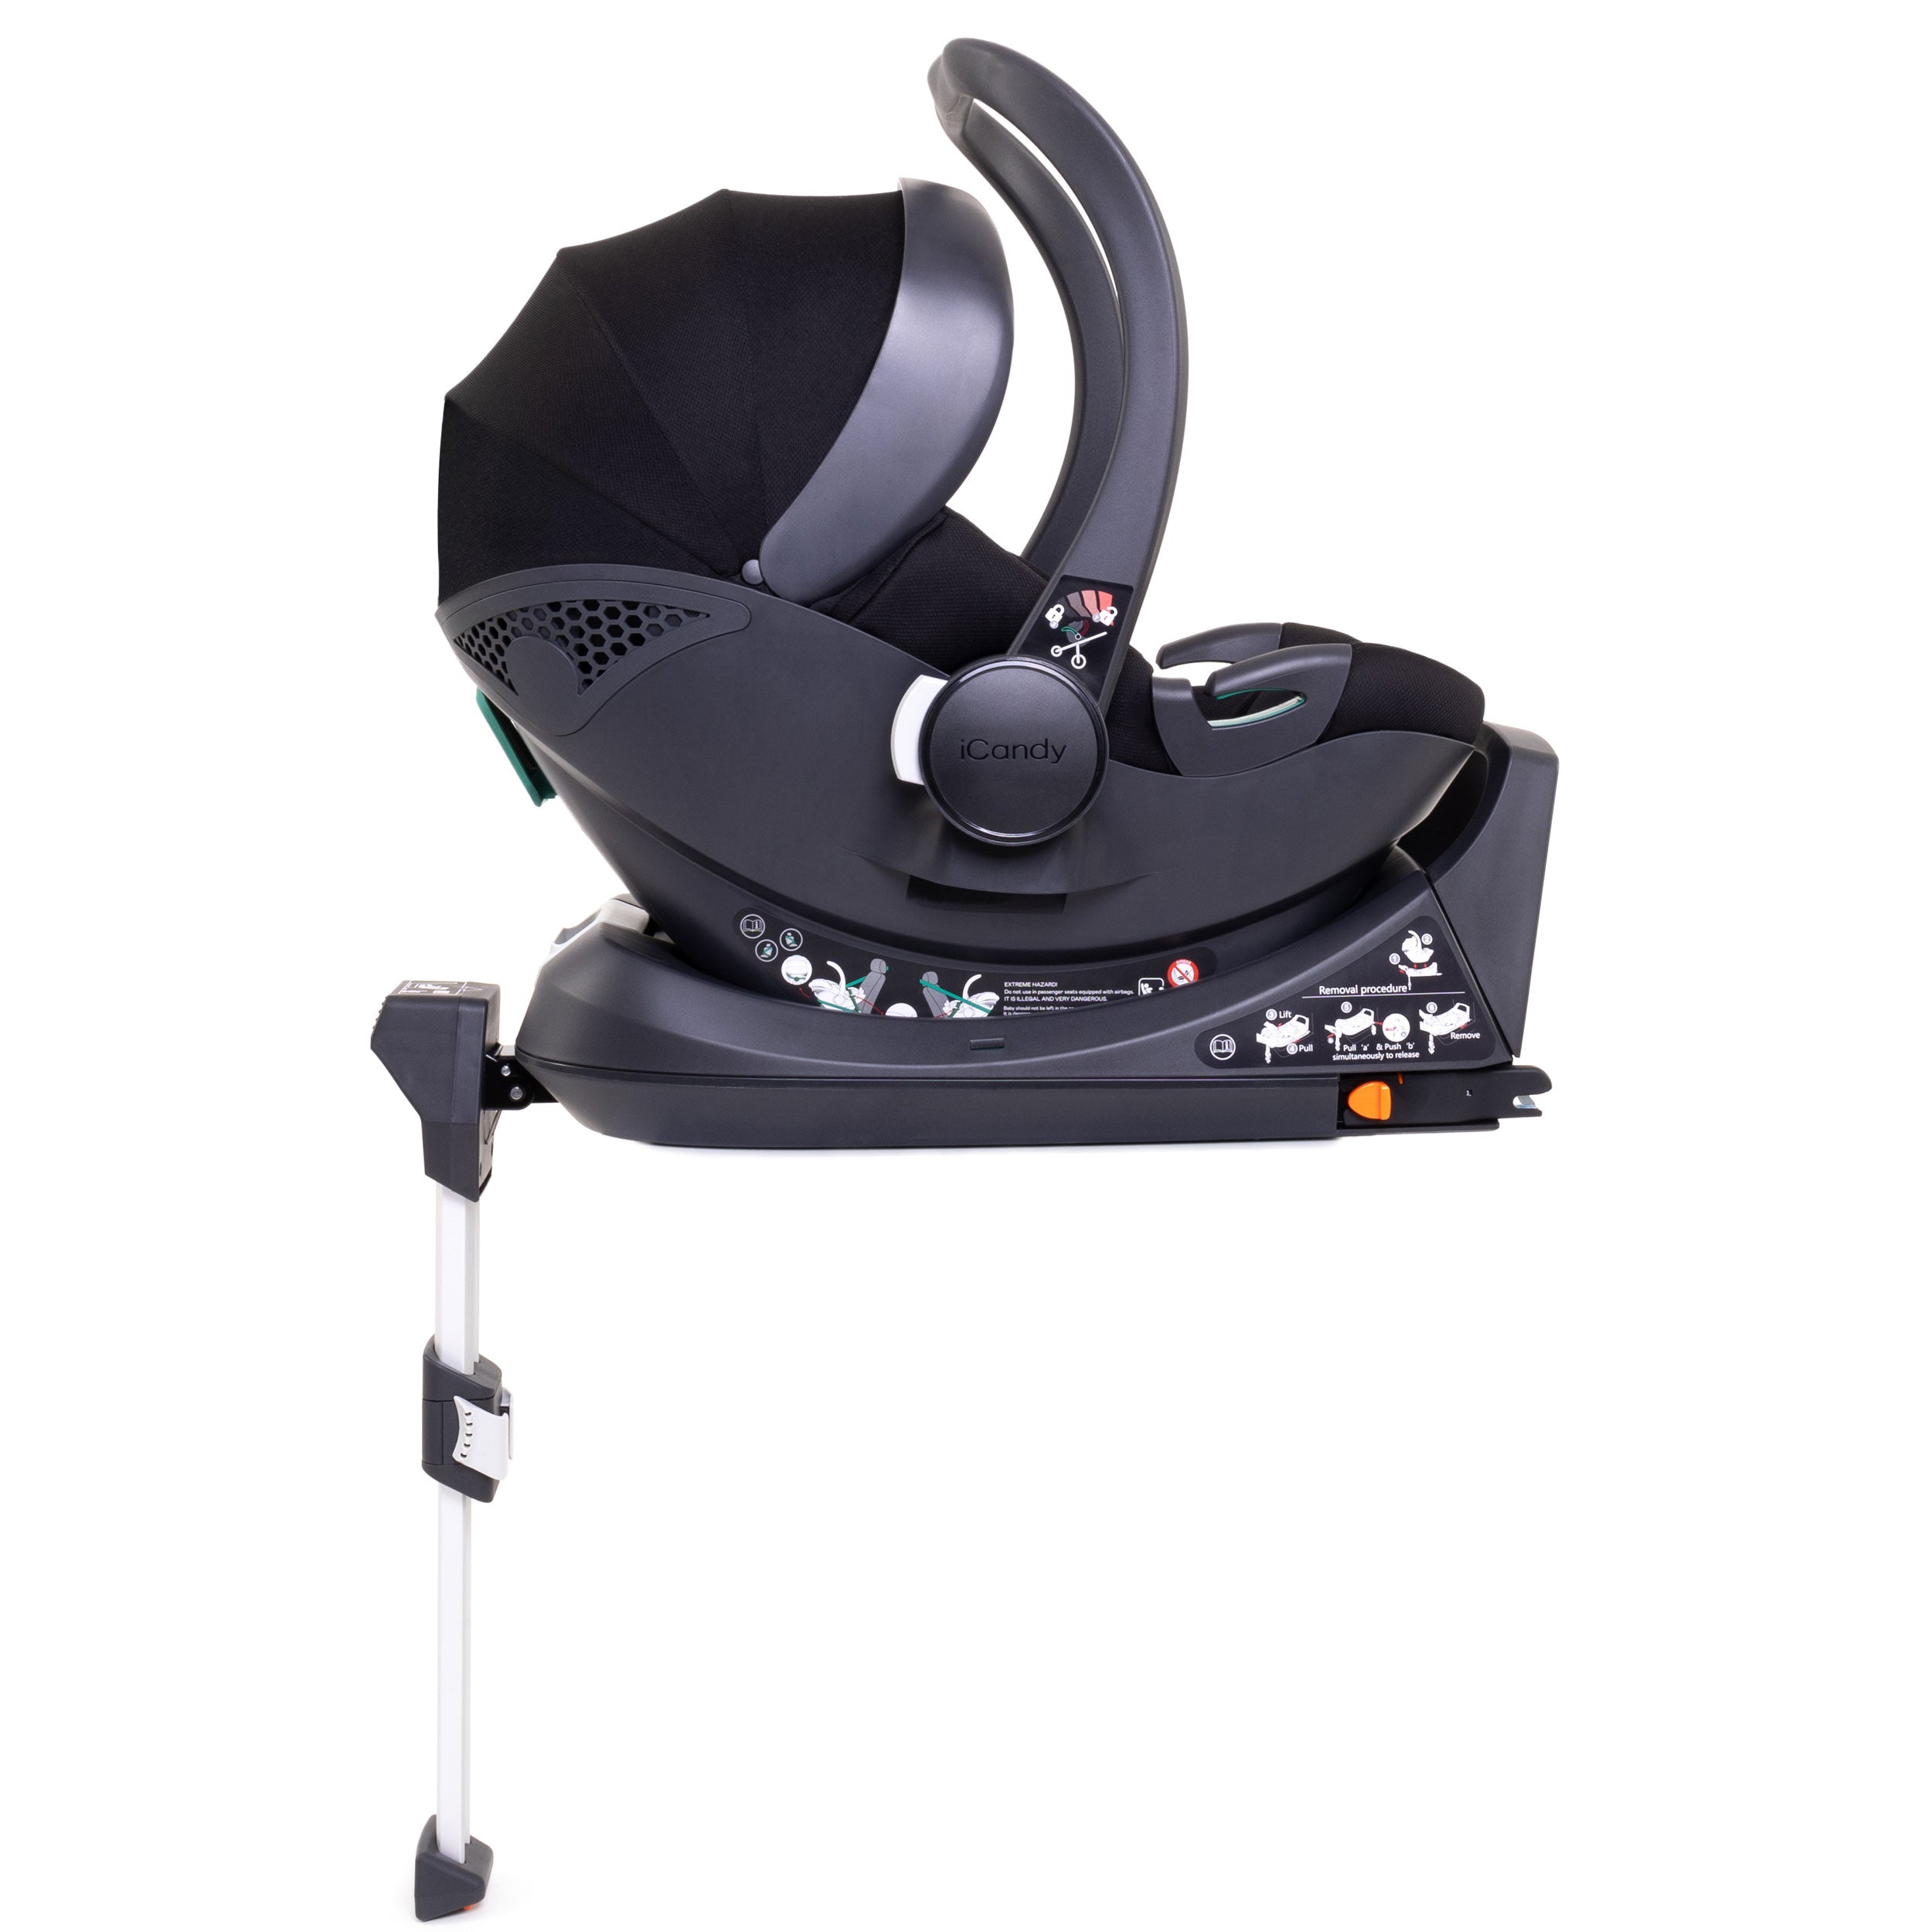 iCandy Peach 7 Complete Bundle with COCOON Car Seat in Blush